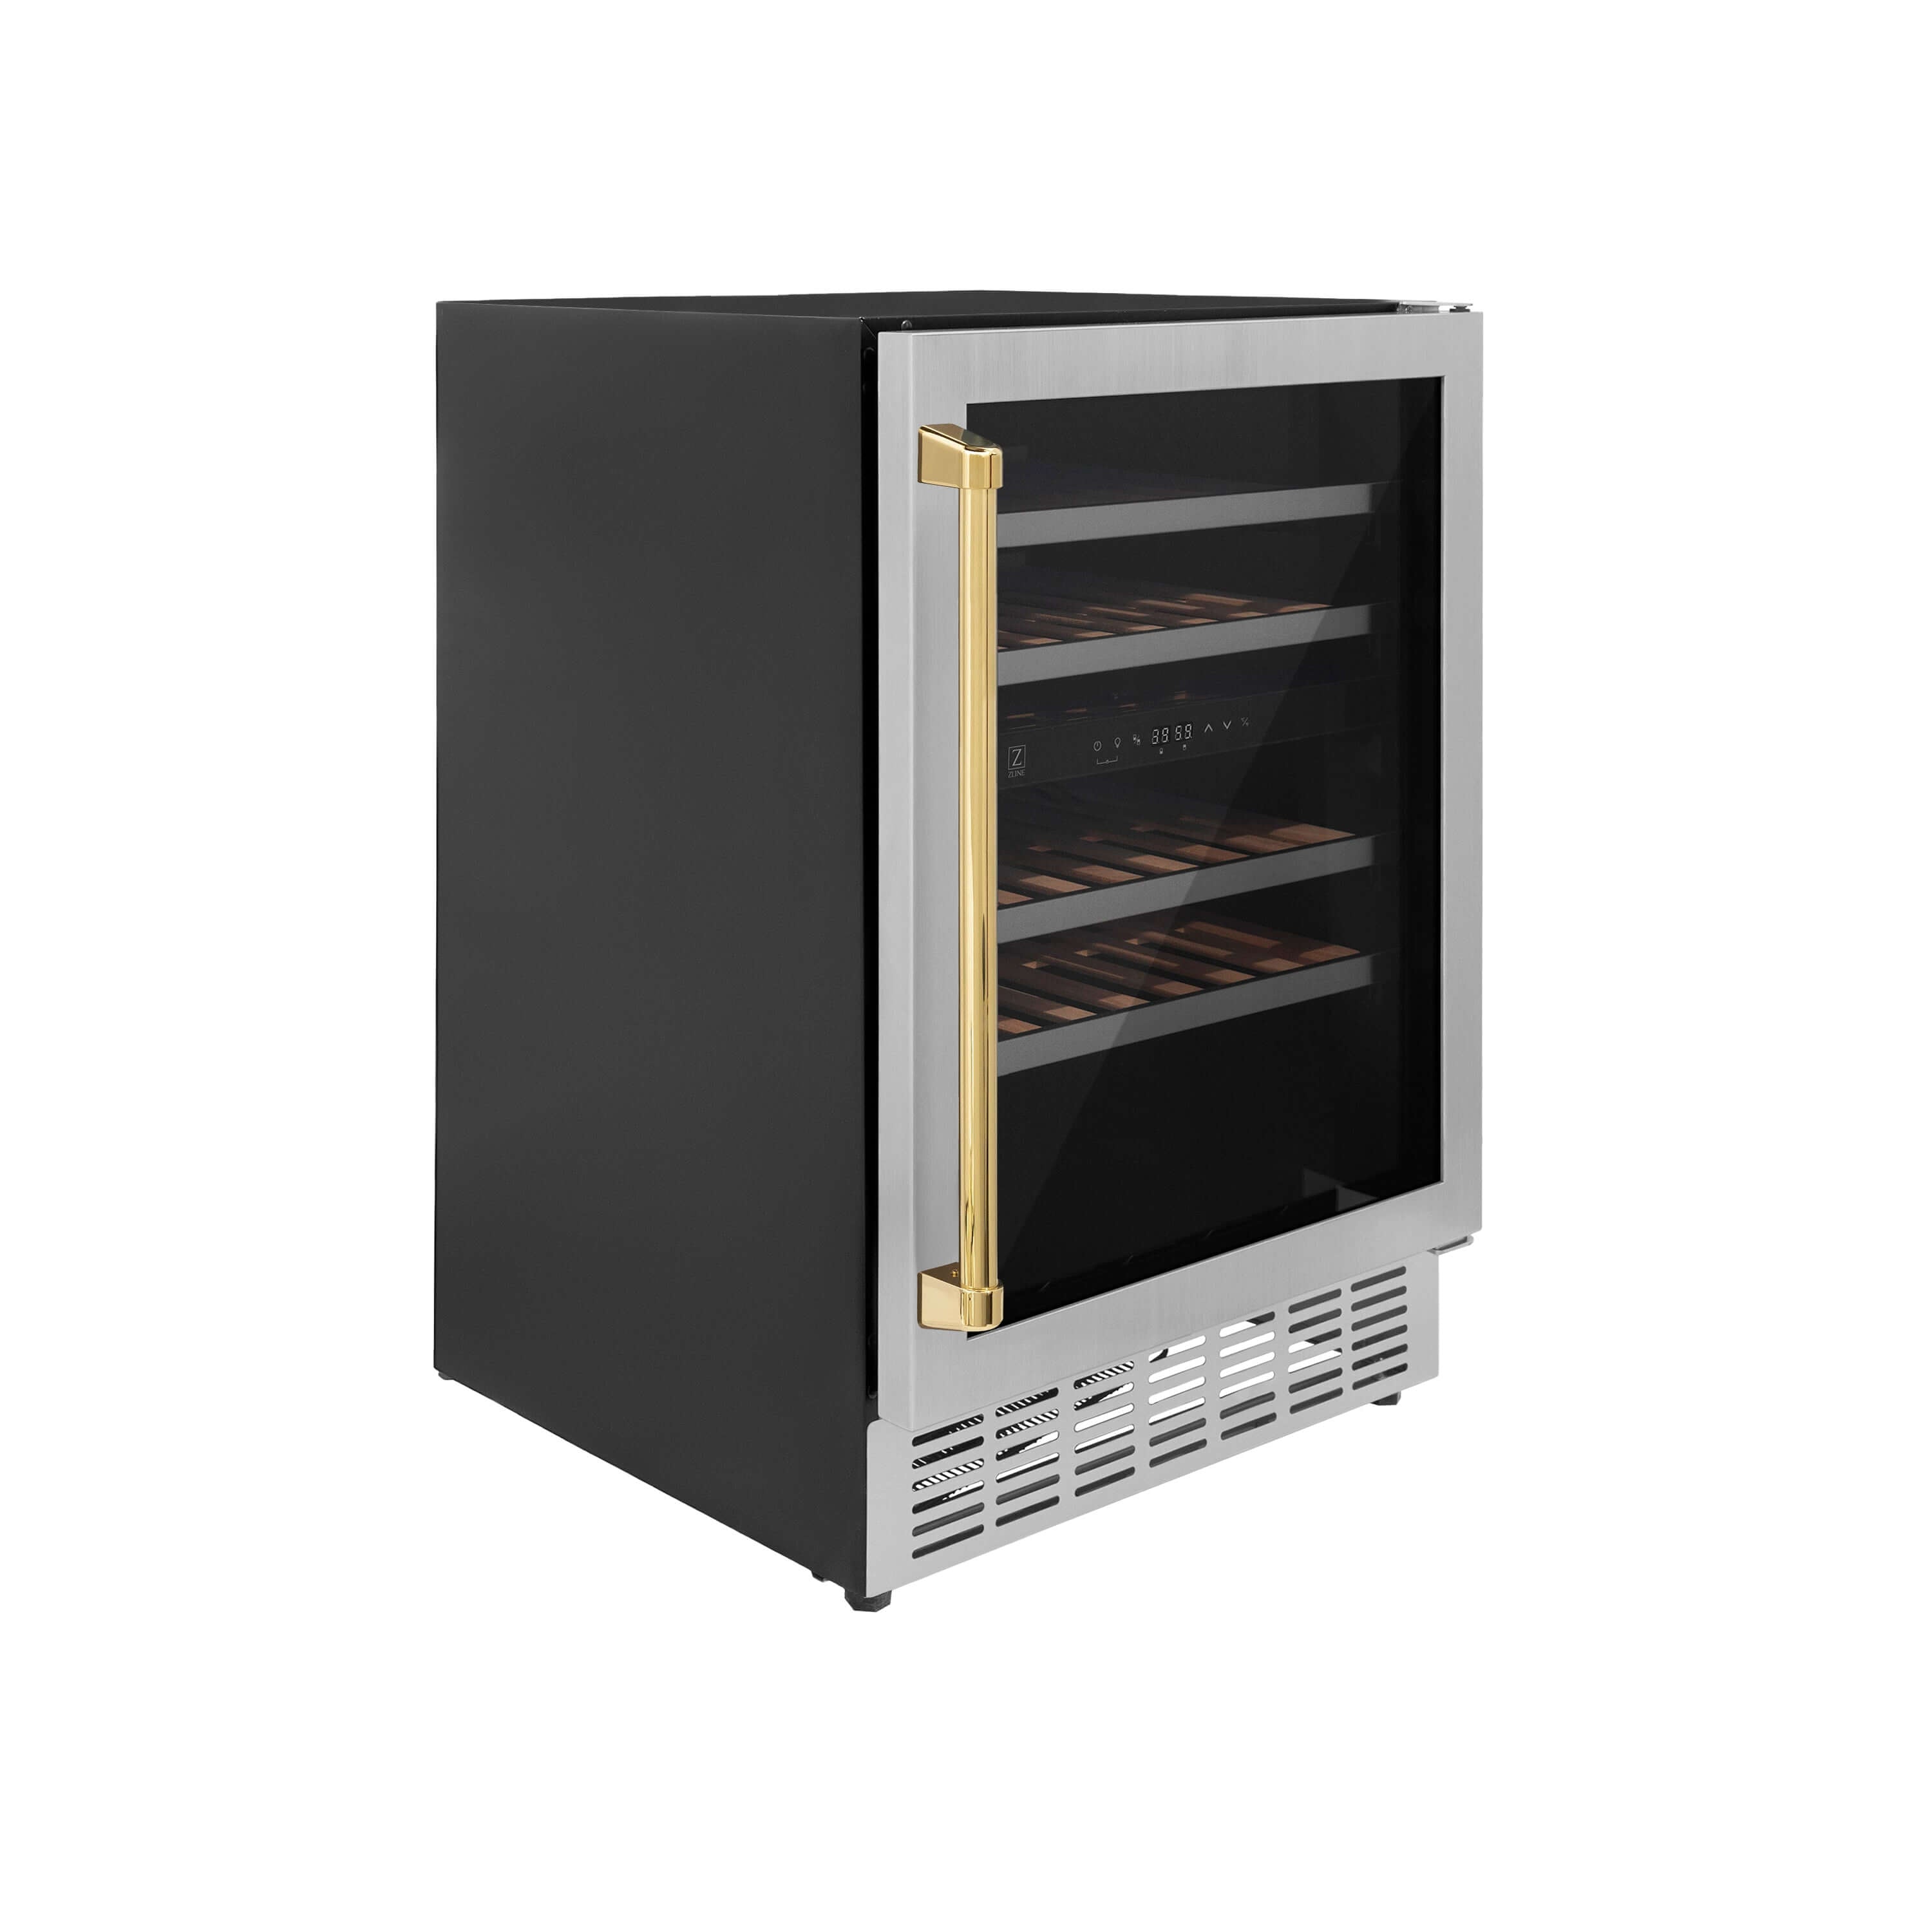 ZLINE 24 in. Monument Autograph Edition Dual Zone 44-Bottle Wine Cooler in Stainless Steel with Polished Gold Accents (RWVZ-UD-24-G)